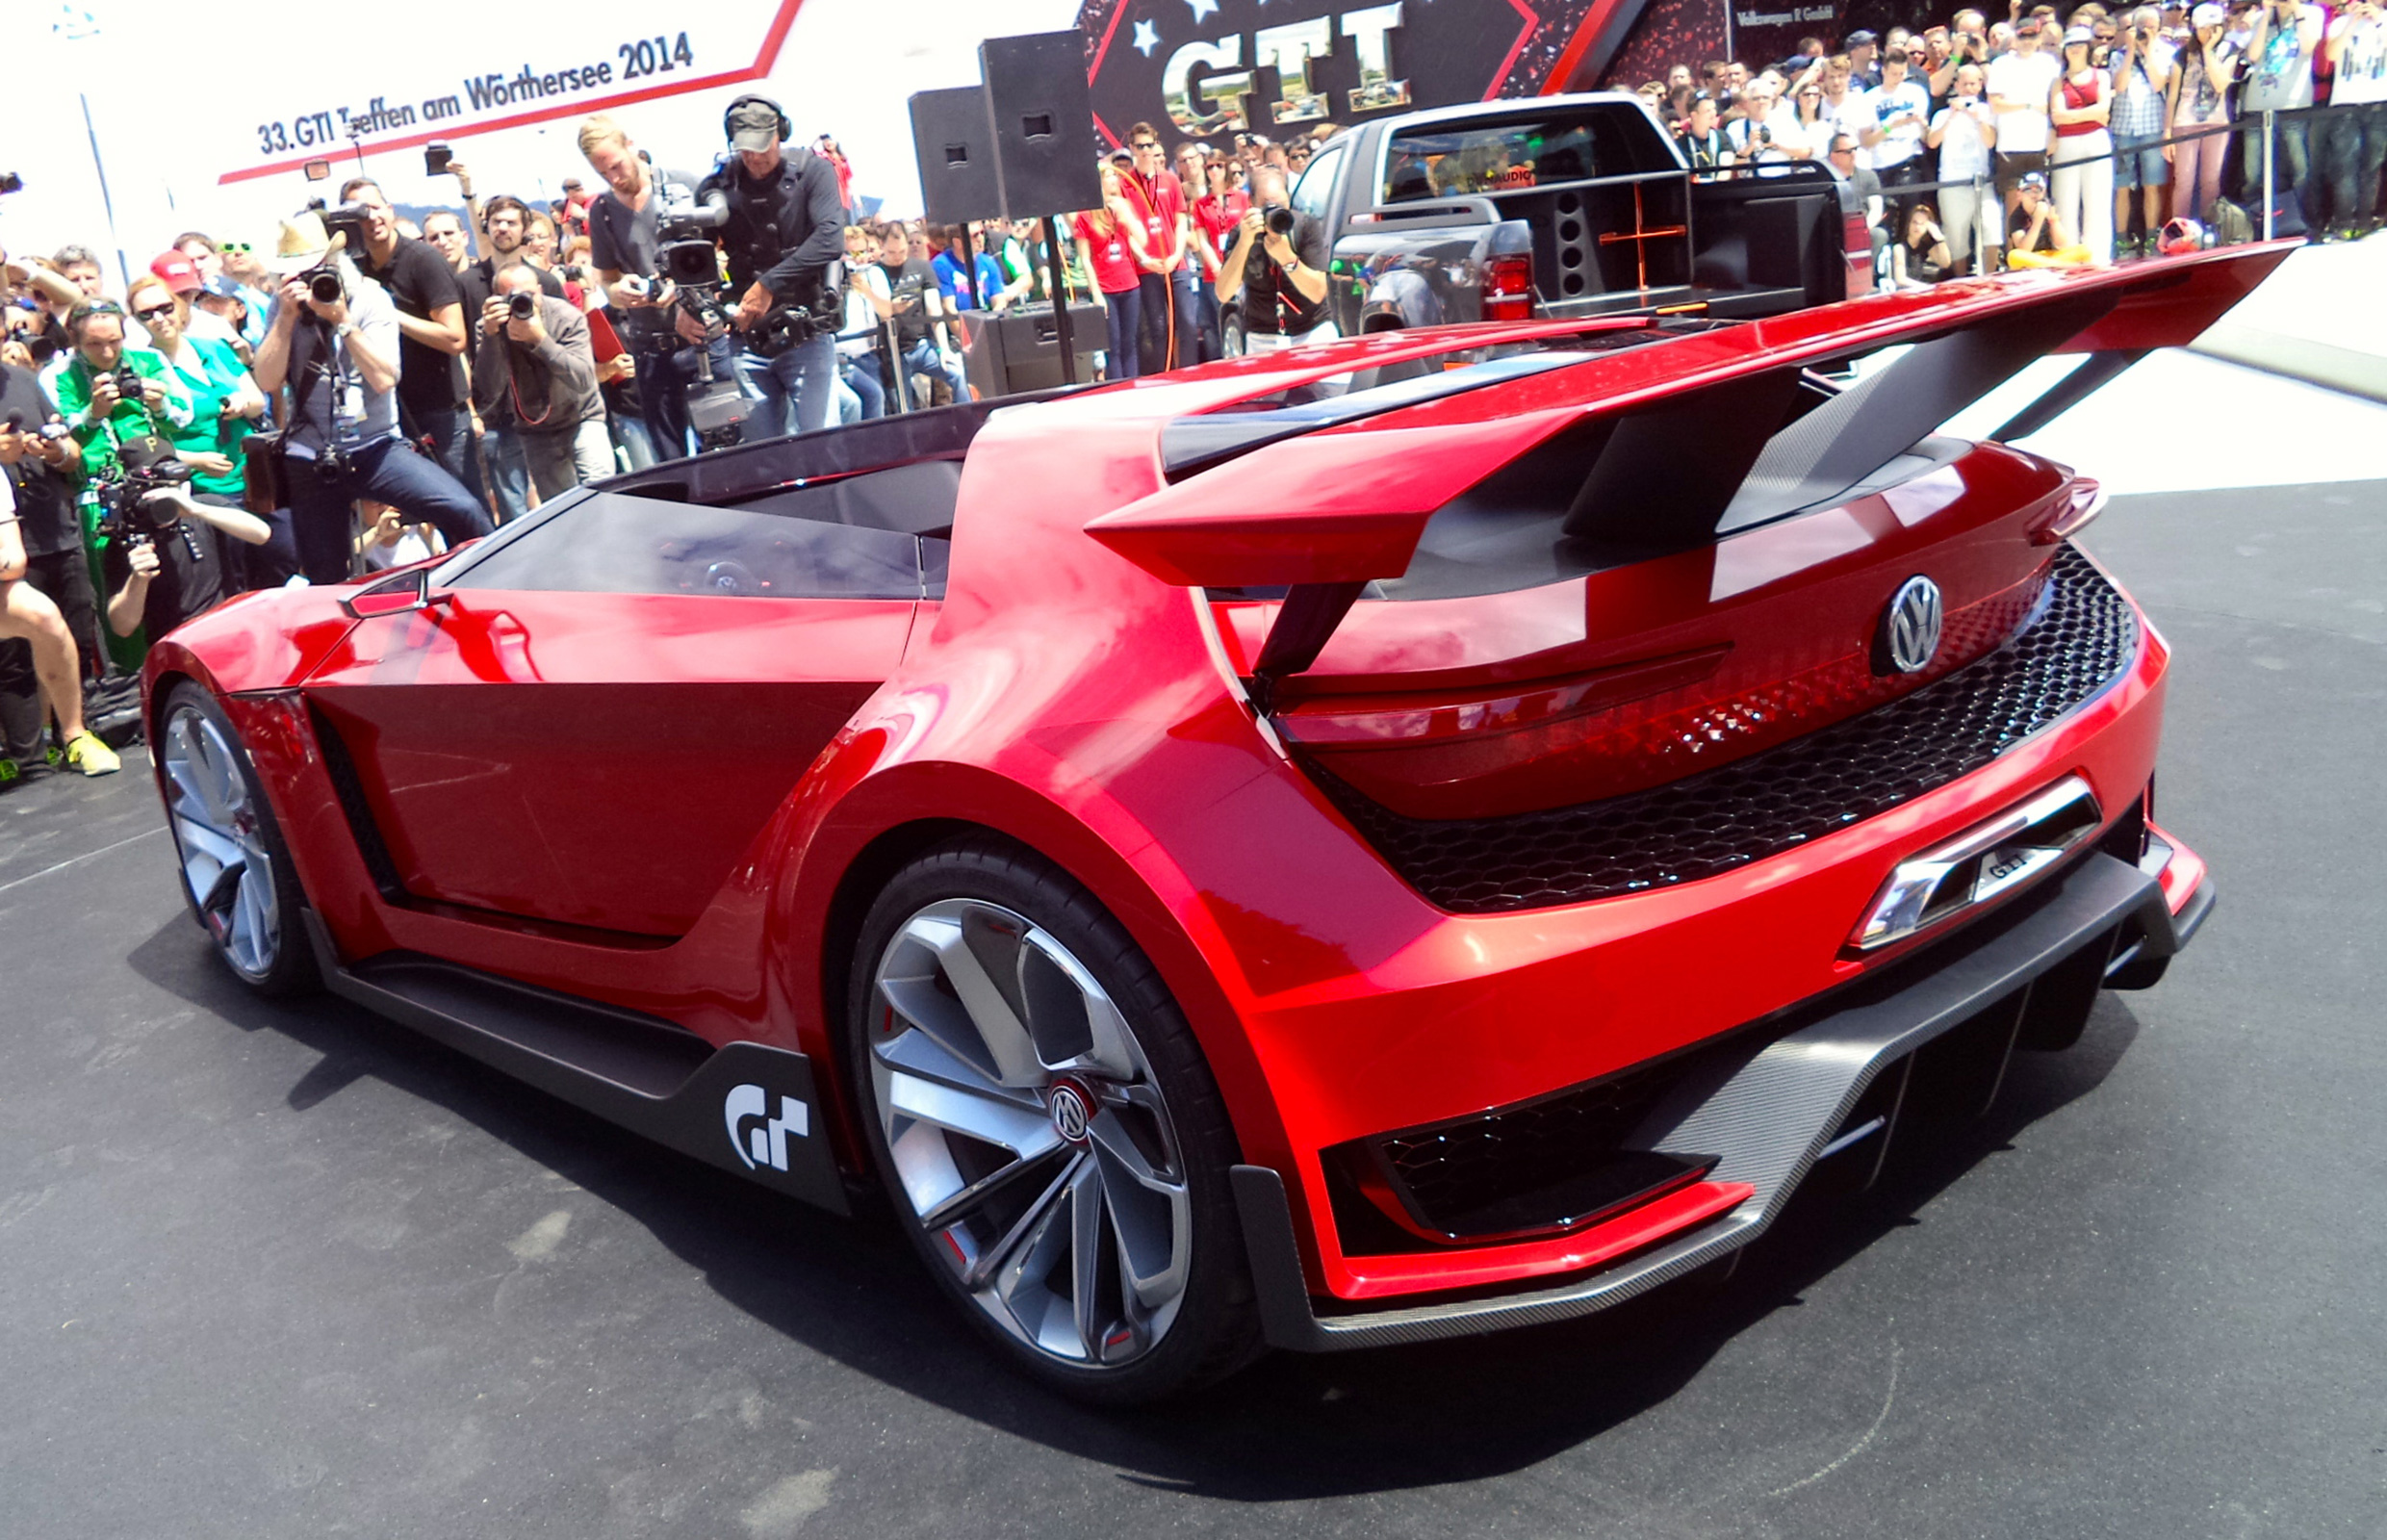 Volkswagen GTI Roadster Backgrounds, Compatible - PC, Mobile, Gadgets| 2480x1600 px